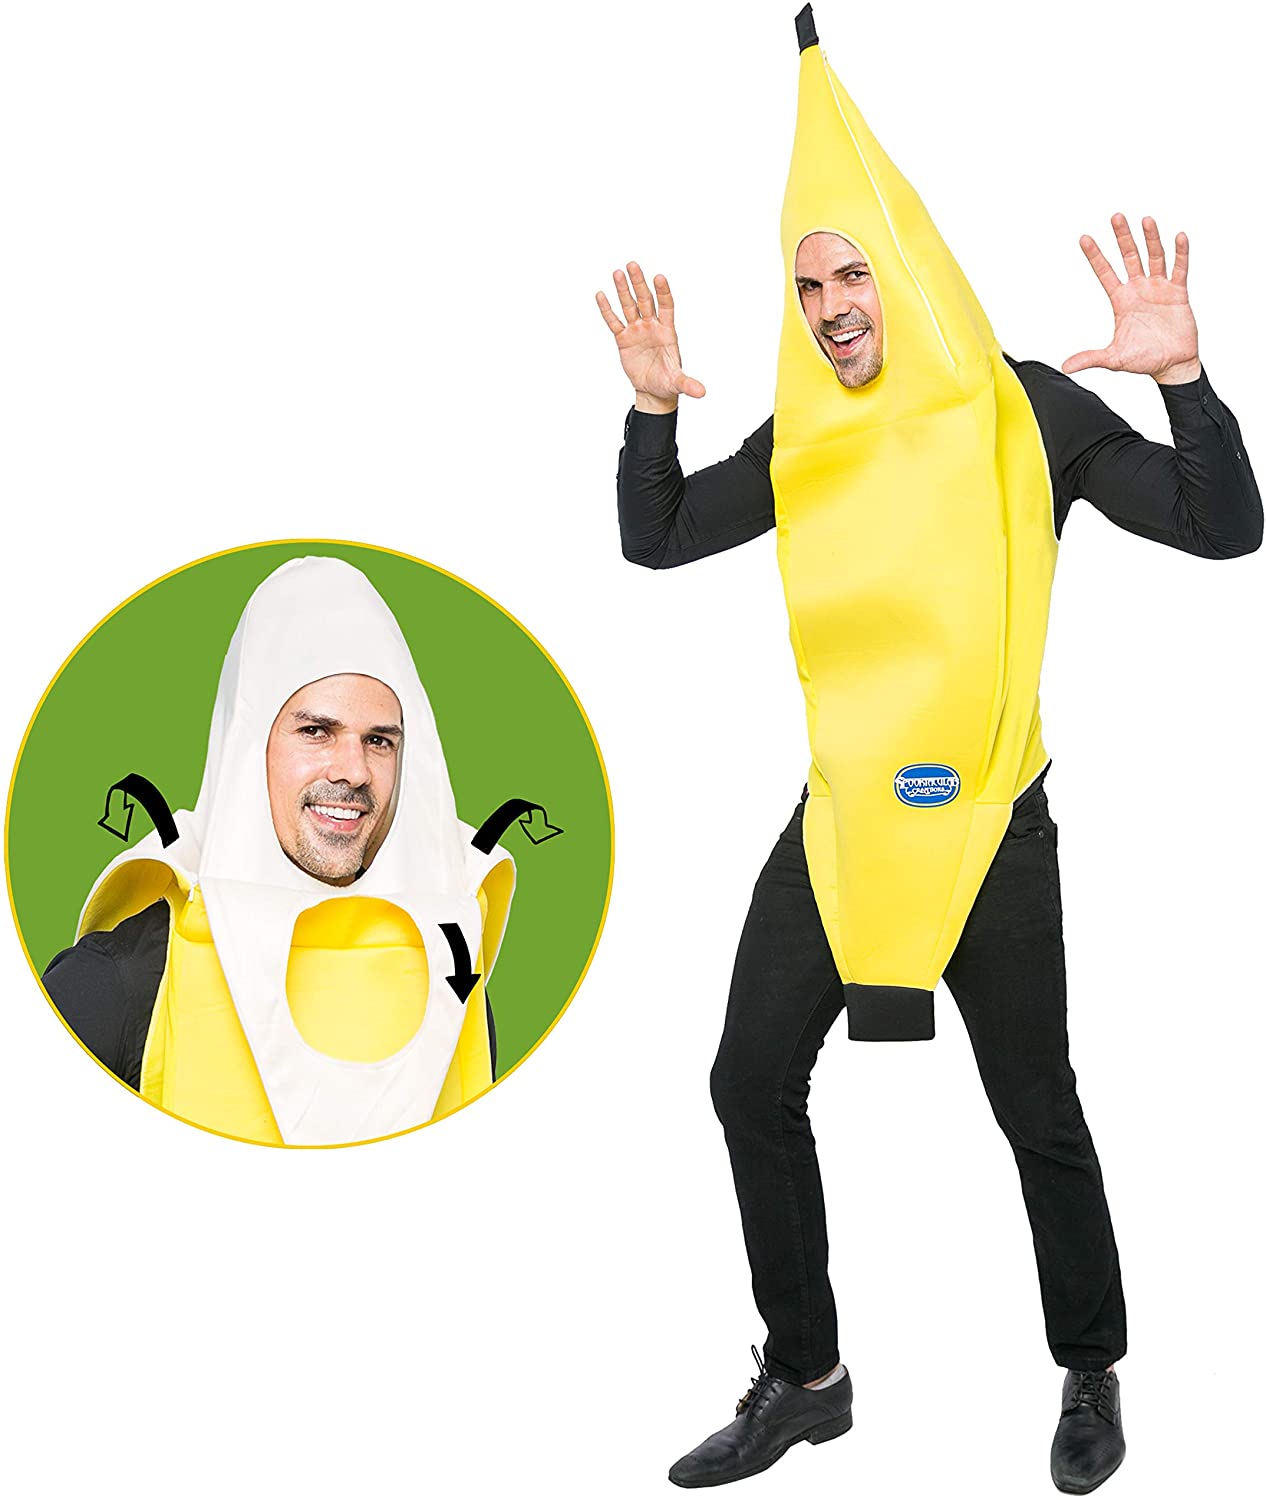 Spooktacular Creations Appealing Banana Costume Adult Set for Halloween Dress Up Party Roleplay Cosplay - image 1 of 5